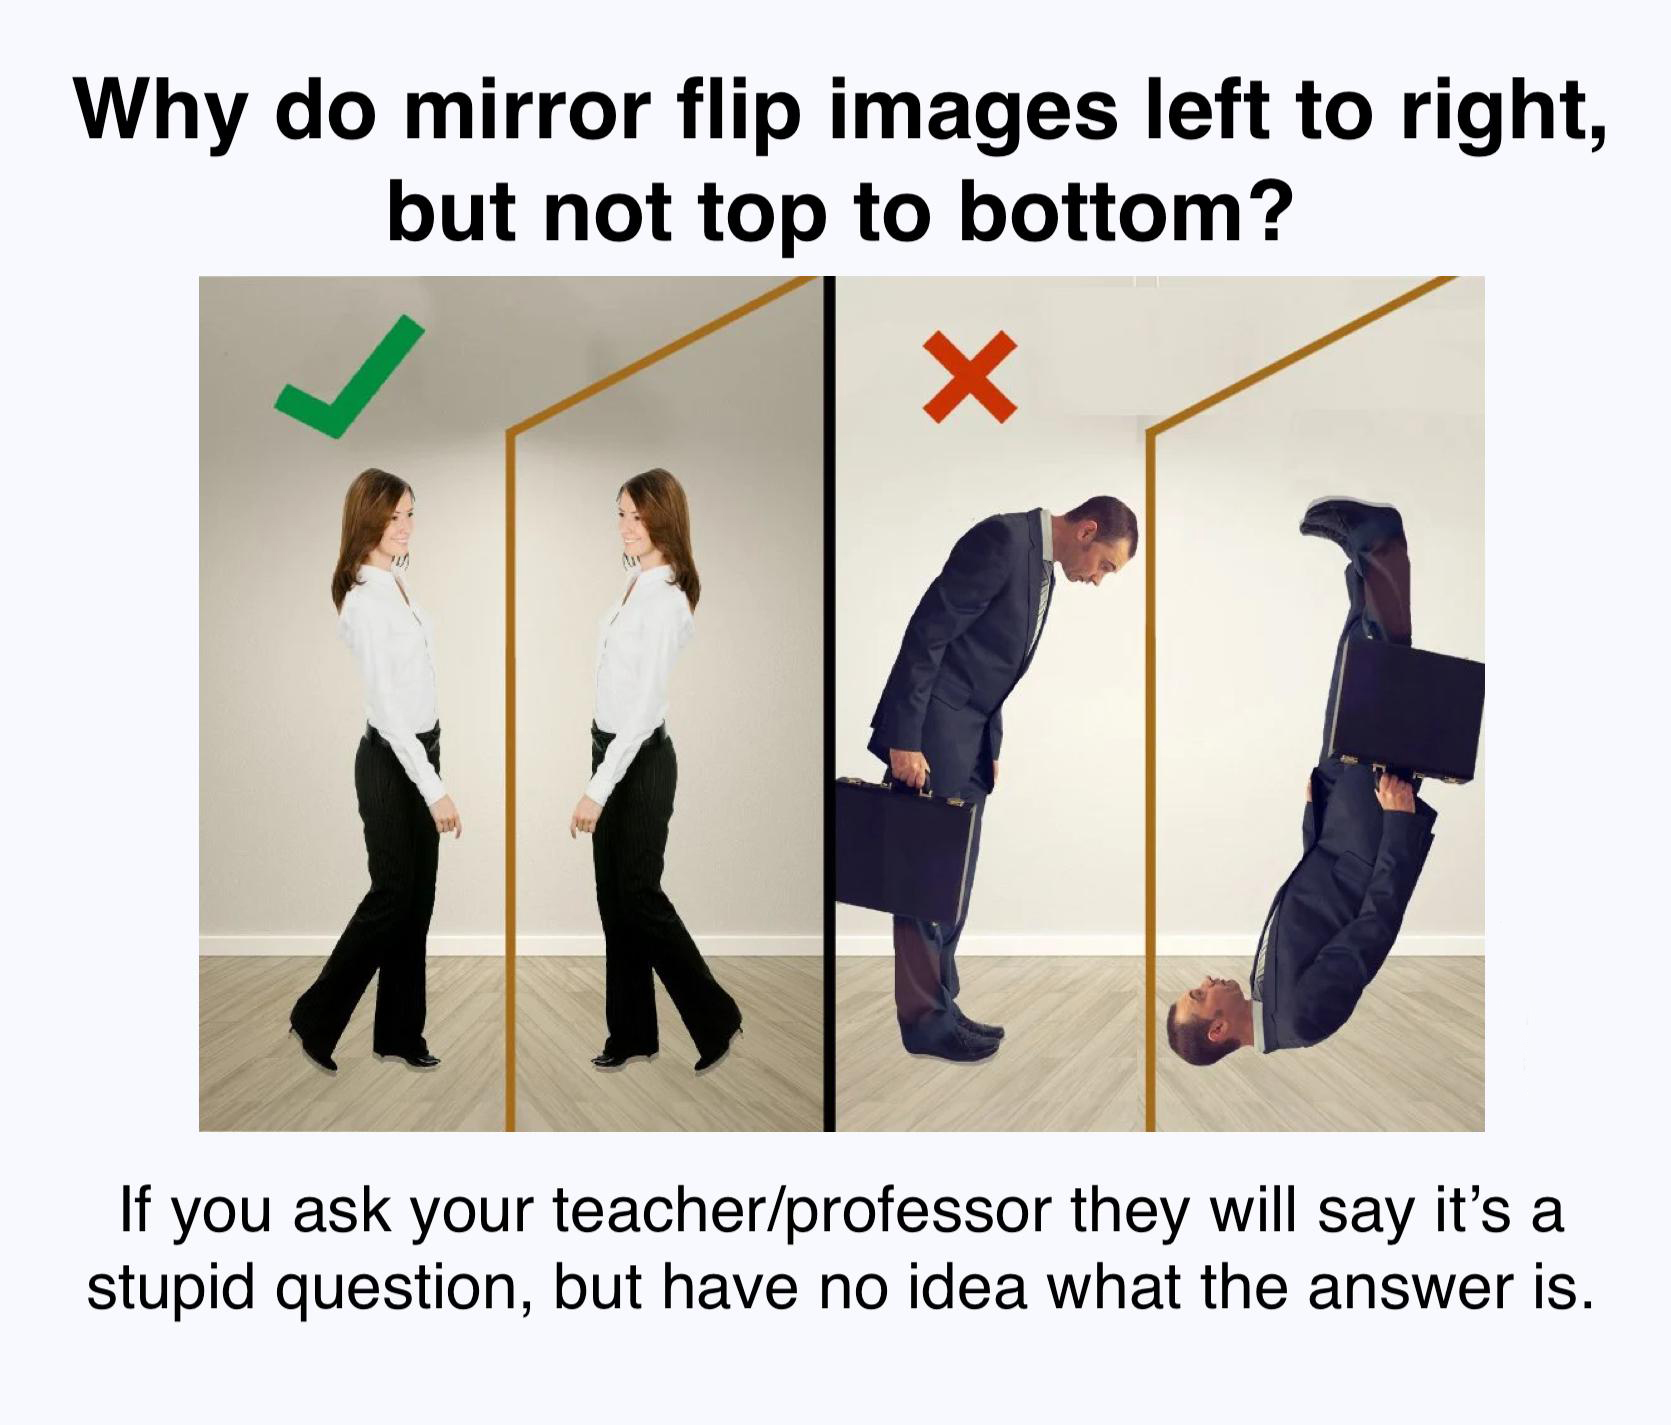 funny memes - mirror reverse - Why do mirror flip images left to right, but not top to bottom? X If you ask your teacherprofessor they will say it's a stupid question, but have no idea what the answer is.